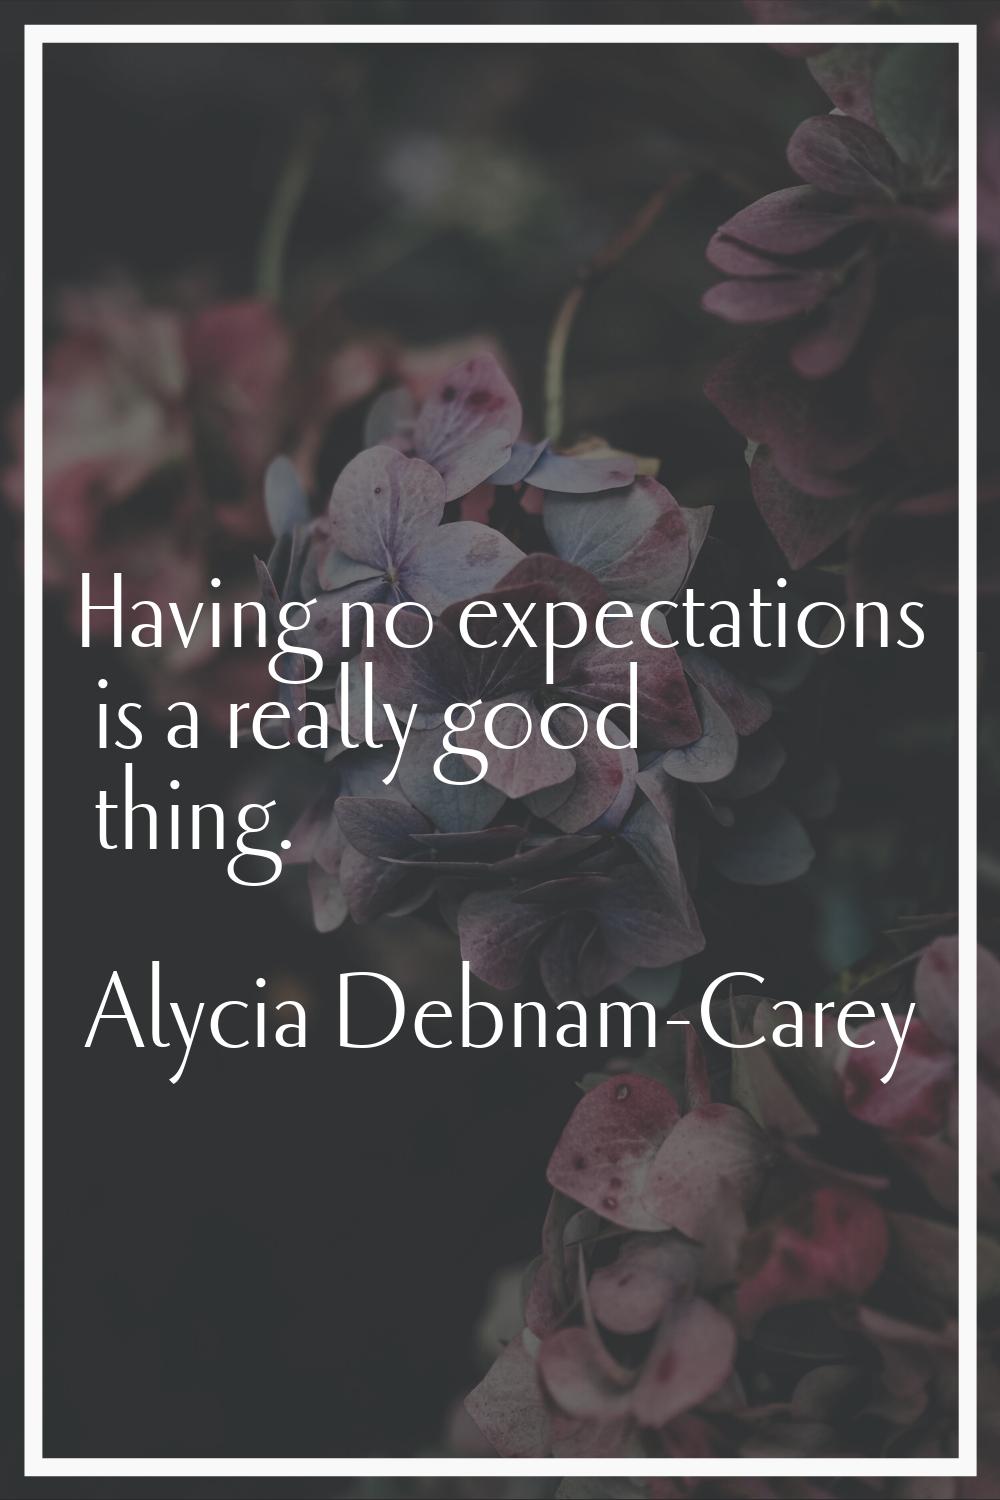 Having no expectations is a really good thing.